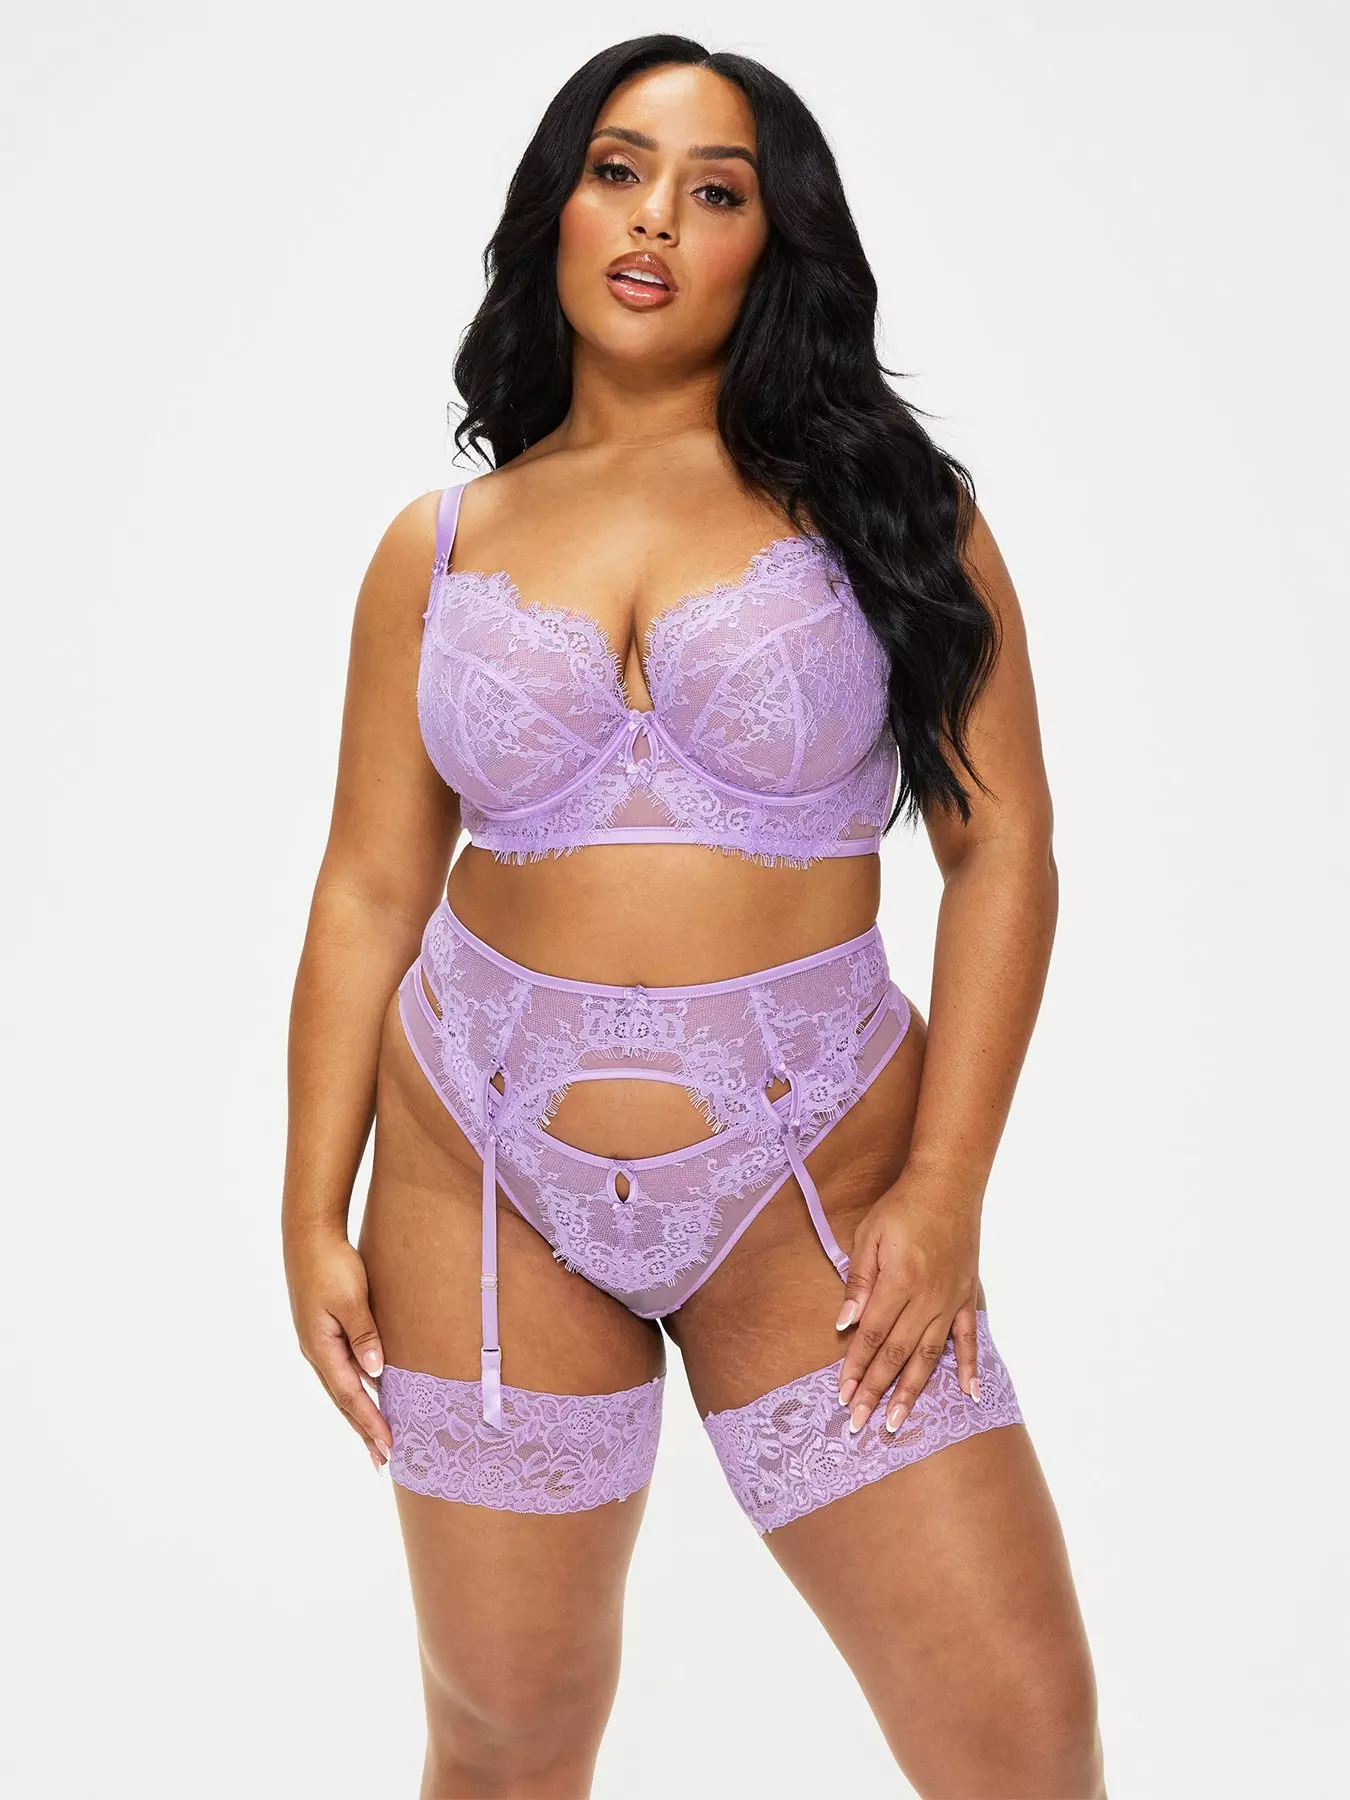 Ann Summers Sexy Lace Planet Fuller Bust Non Pad White